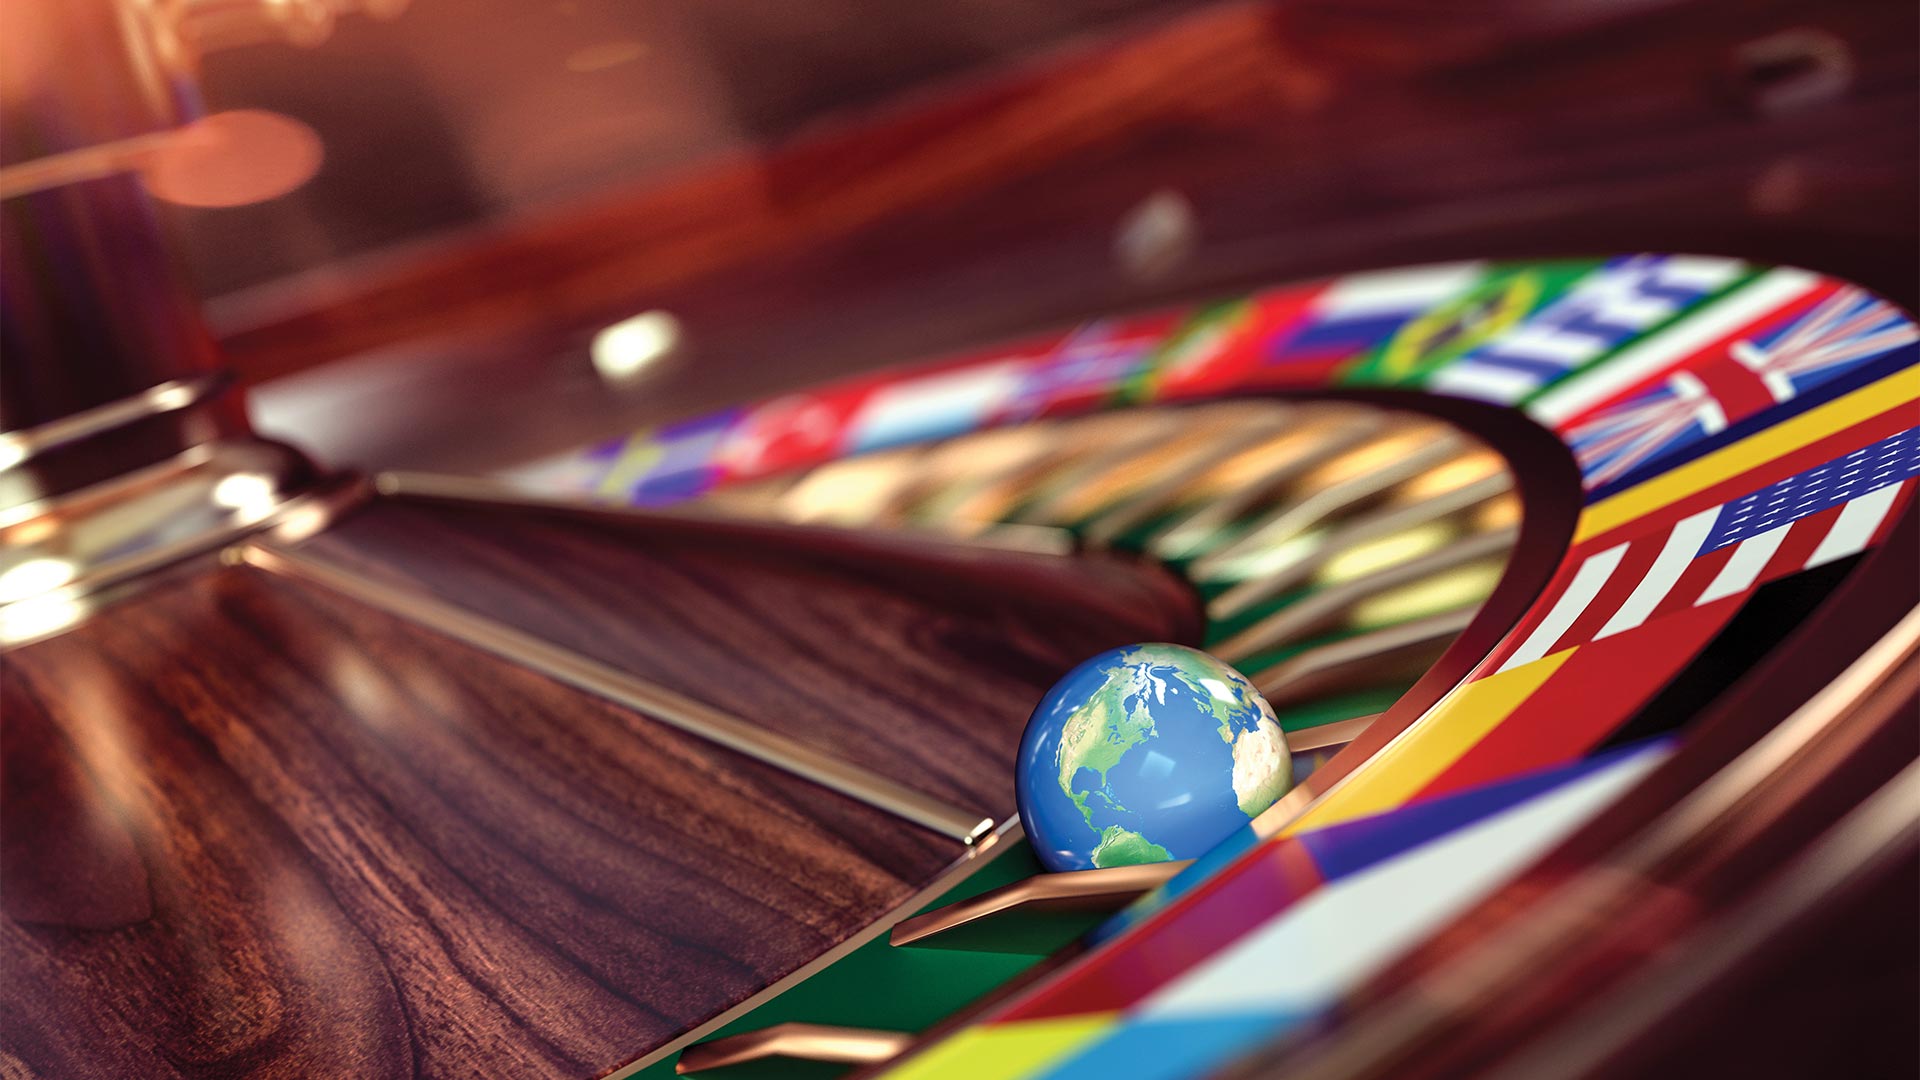 Illustration of the earth on a roulette table with country flags